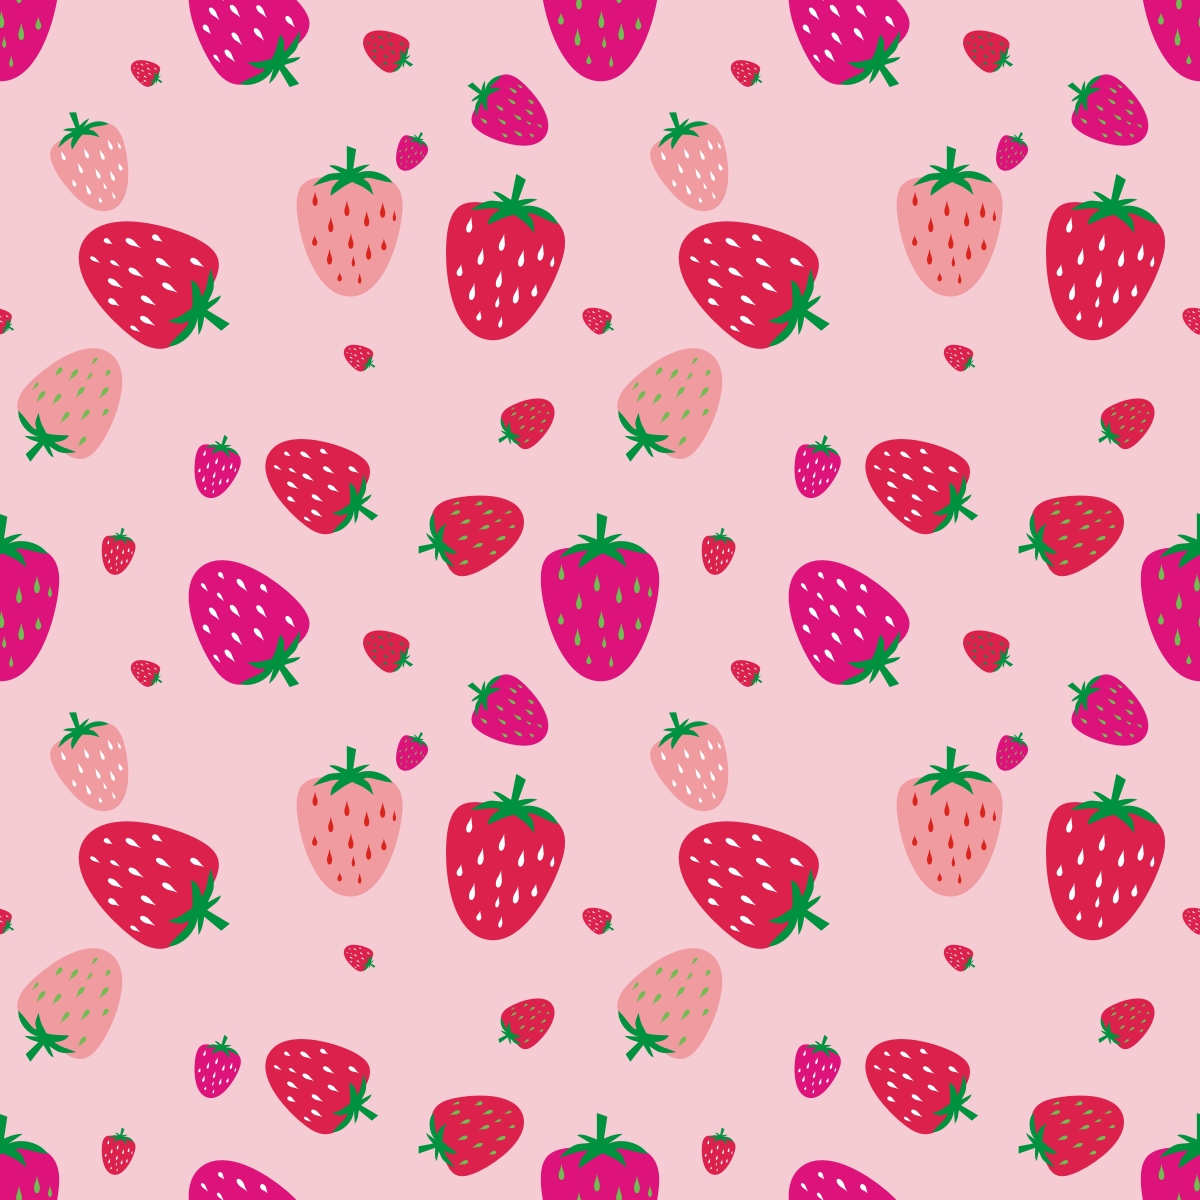 How to Make Strawberry Pattern in CorelDRAW on Vectorgraphit